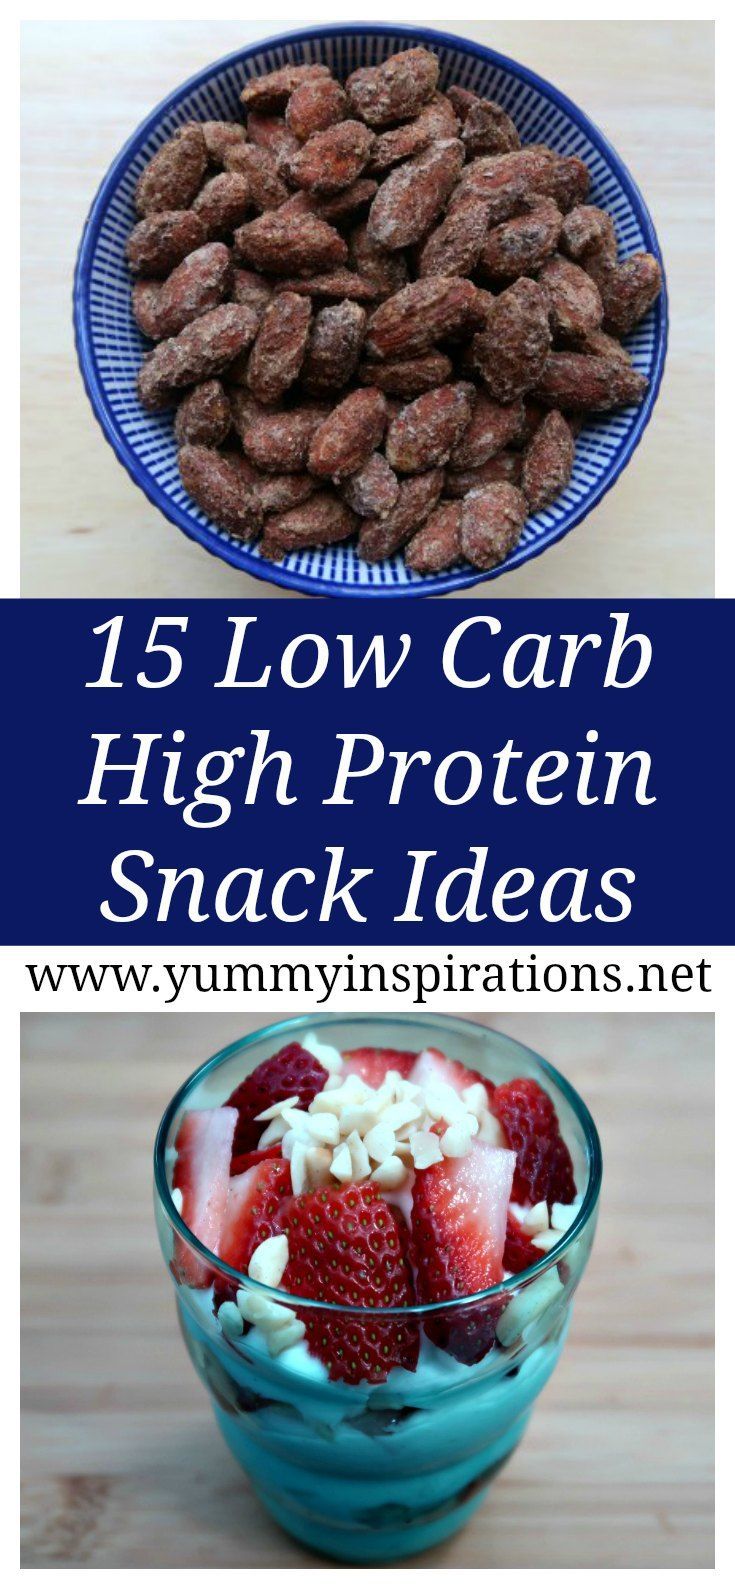 15 Low Carb High Protein Snacks - Ideas For Easy Keto Diet Snacks -   16 diet Snacks diy ideas